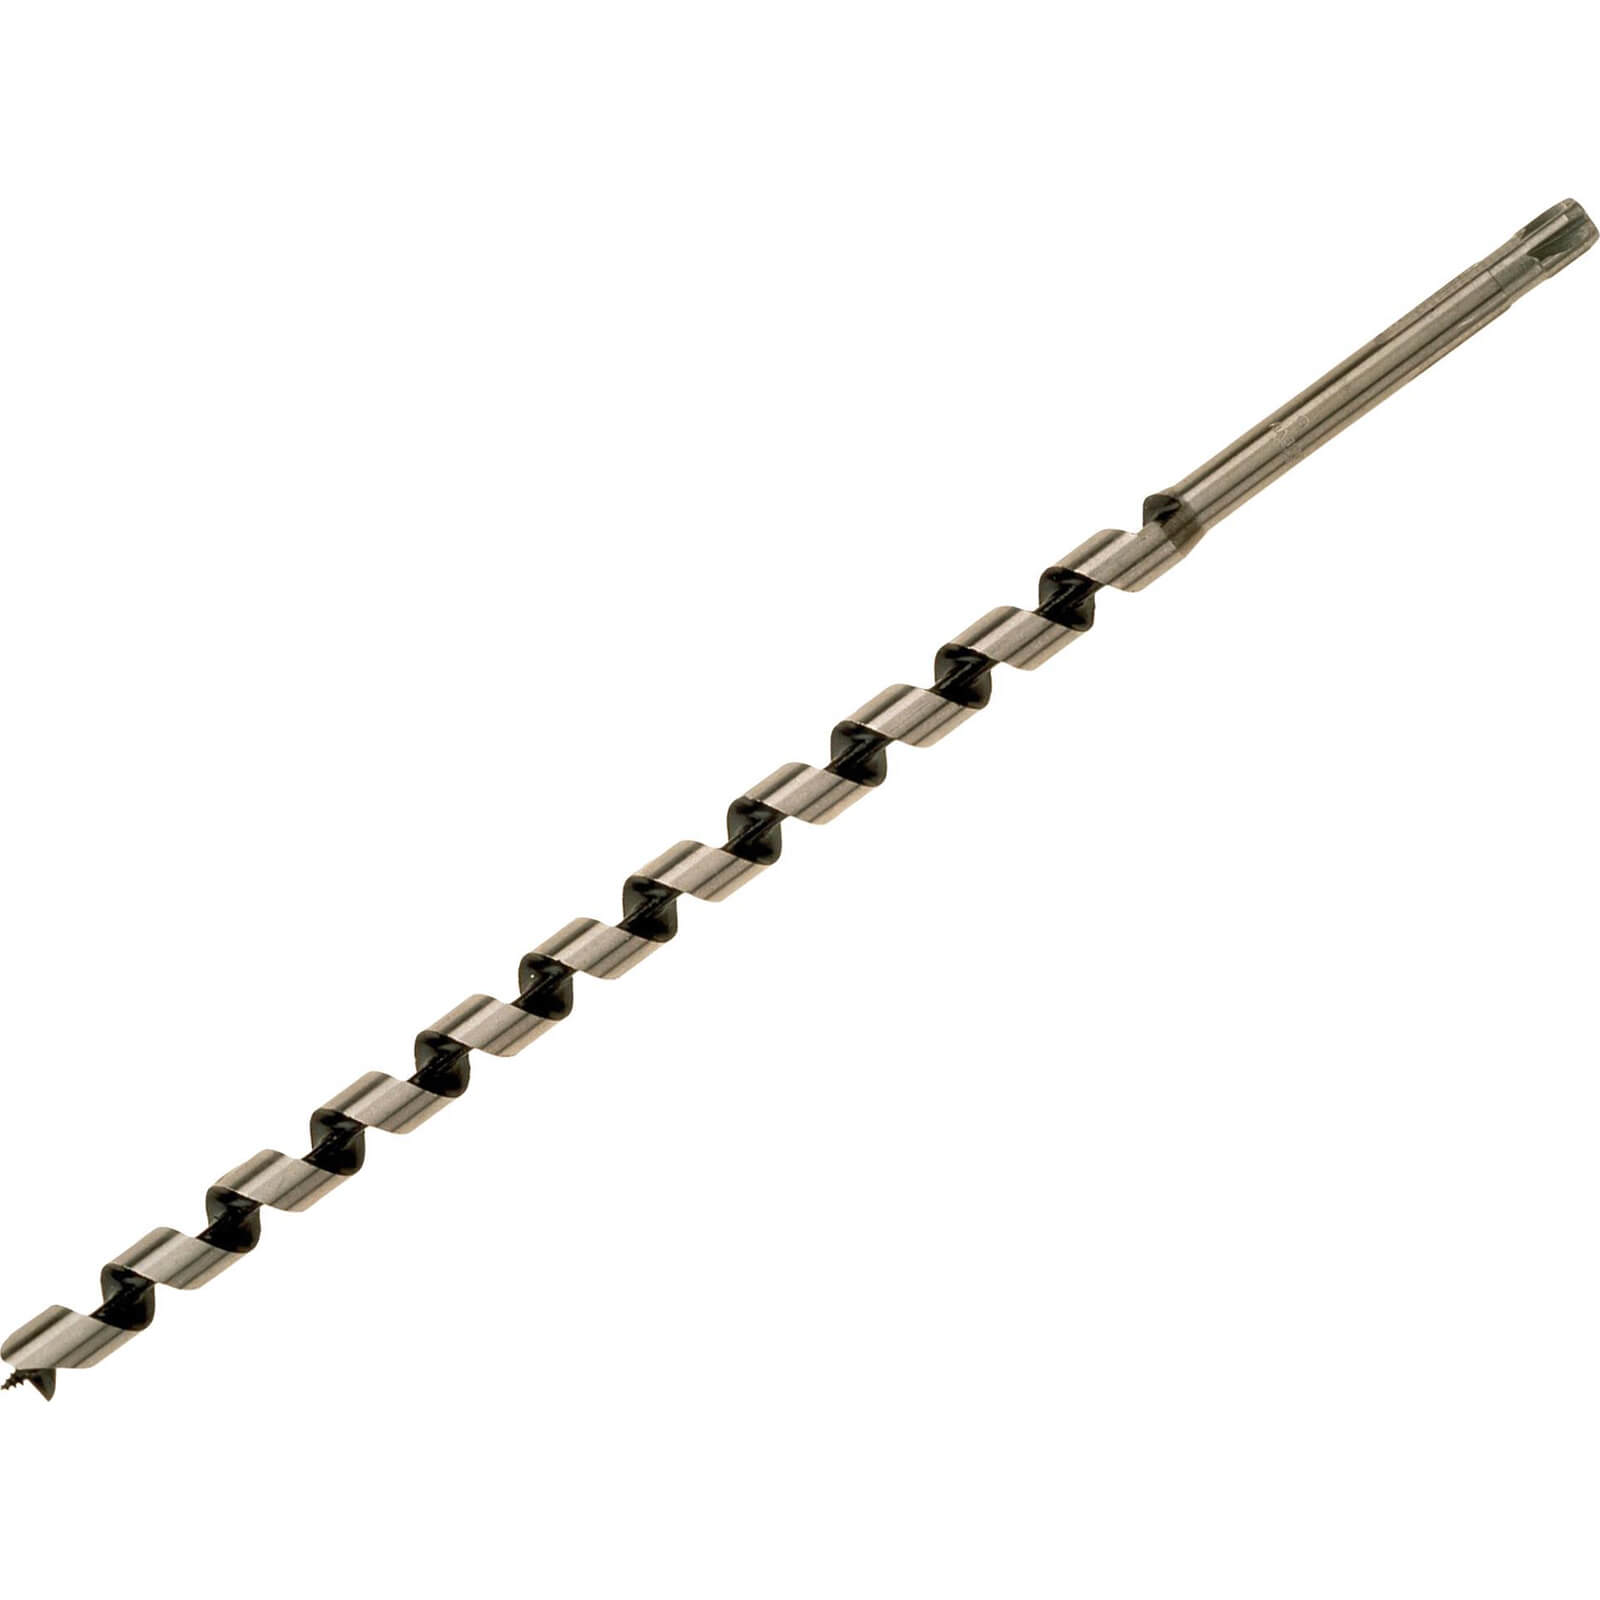 Image of Bahco 9627 Series Long Combination Auger Drill Bit 12mm 460mm